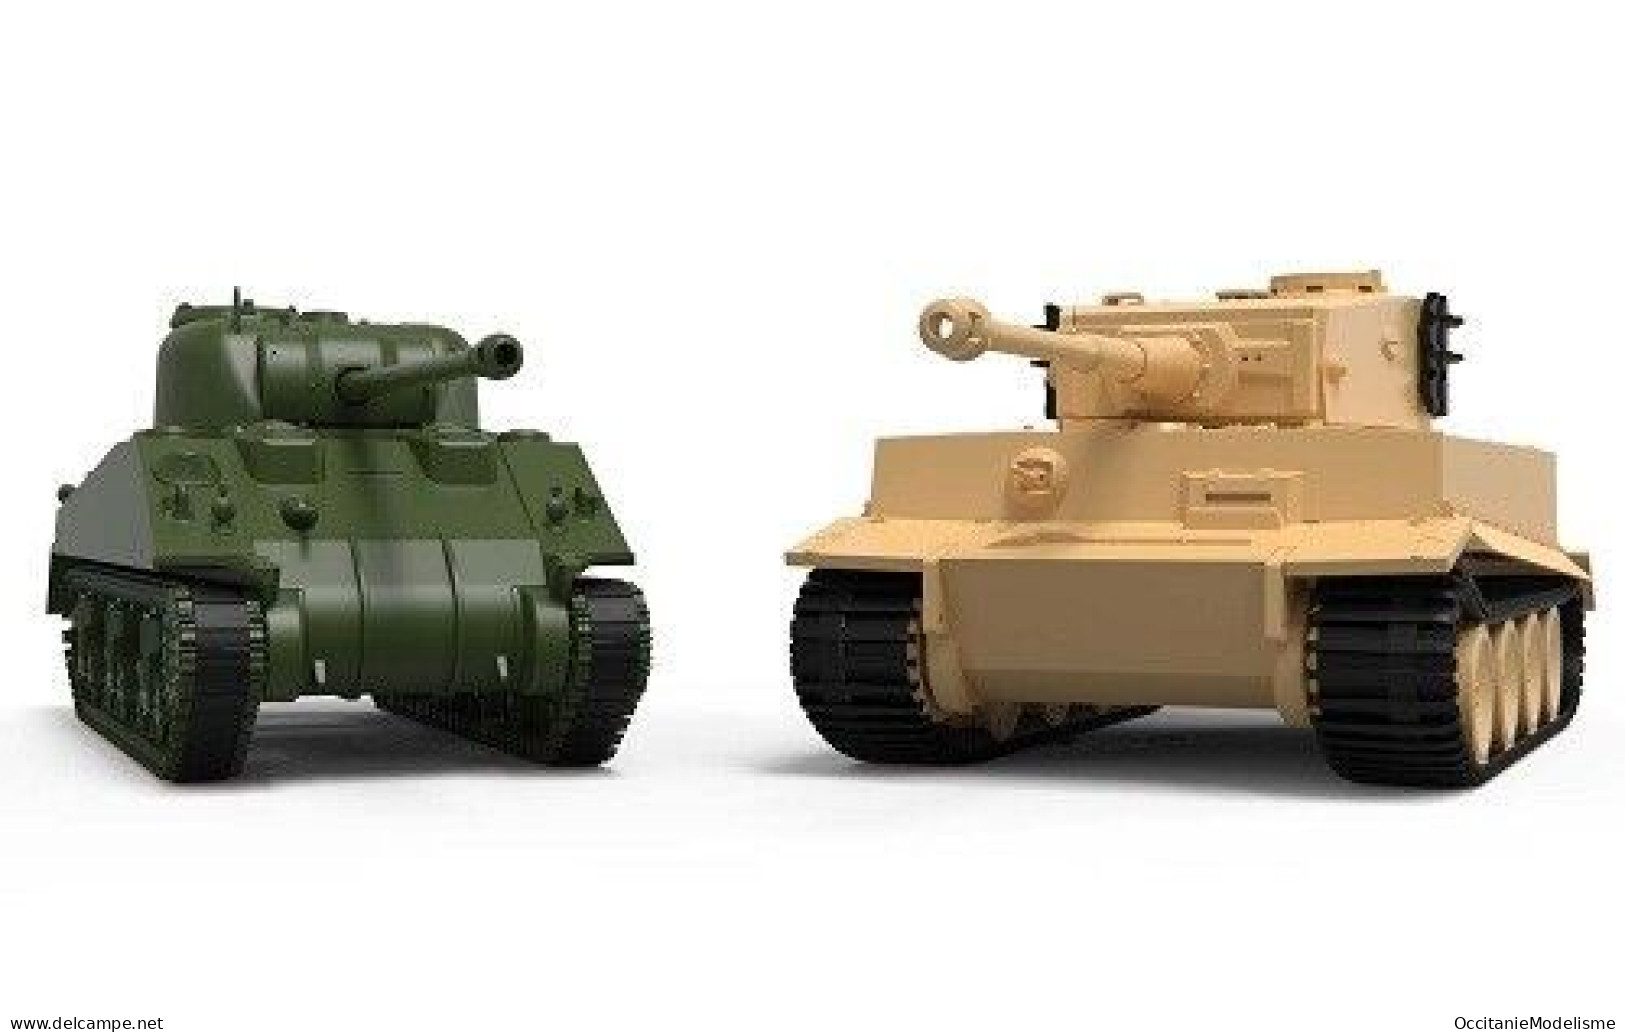 Airfix - Coffret TIGER I Vs SHERMAN FIREFLY Vc Maquettes + Peintures + Colle Réf. A50186 Neuf NBO 1/72 - Military Vehicles